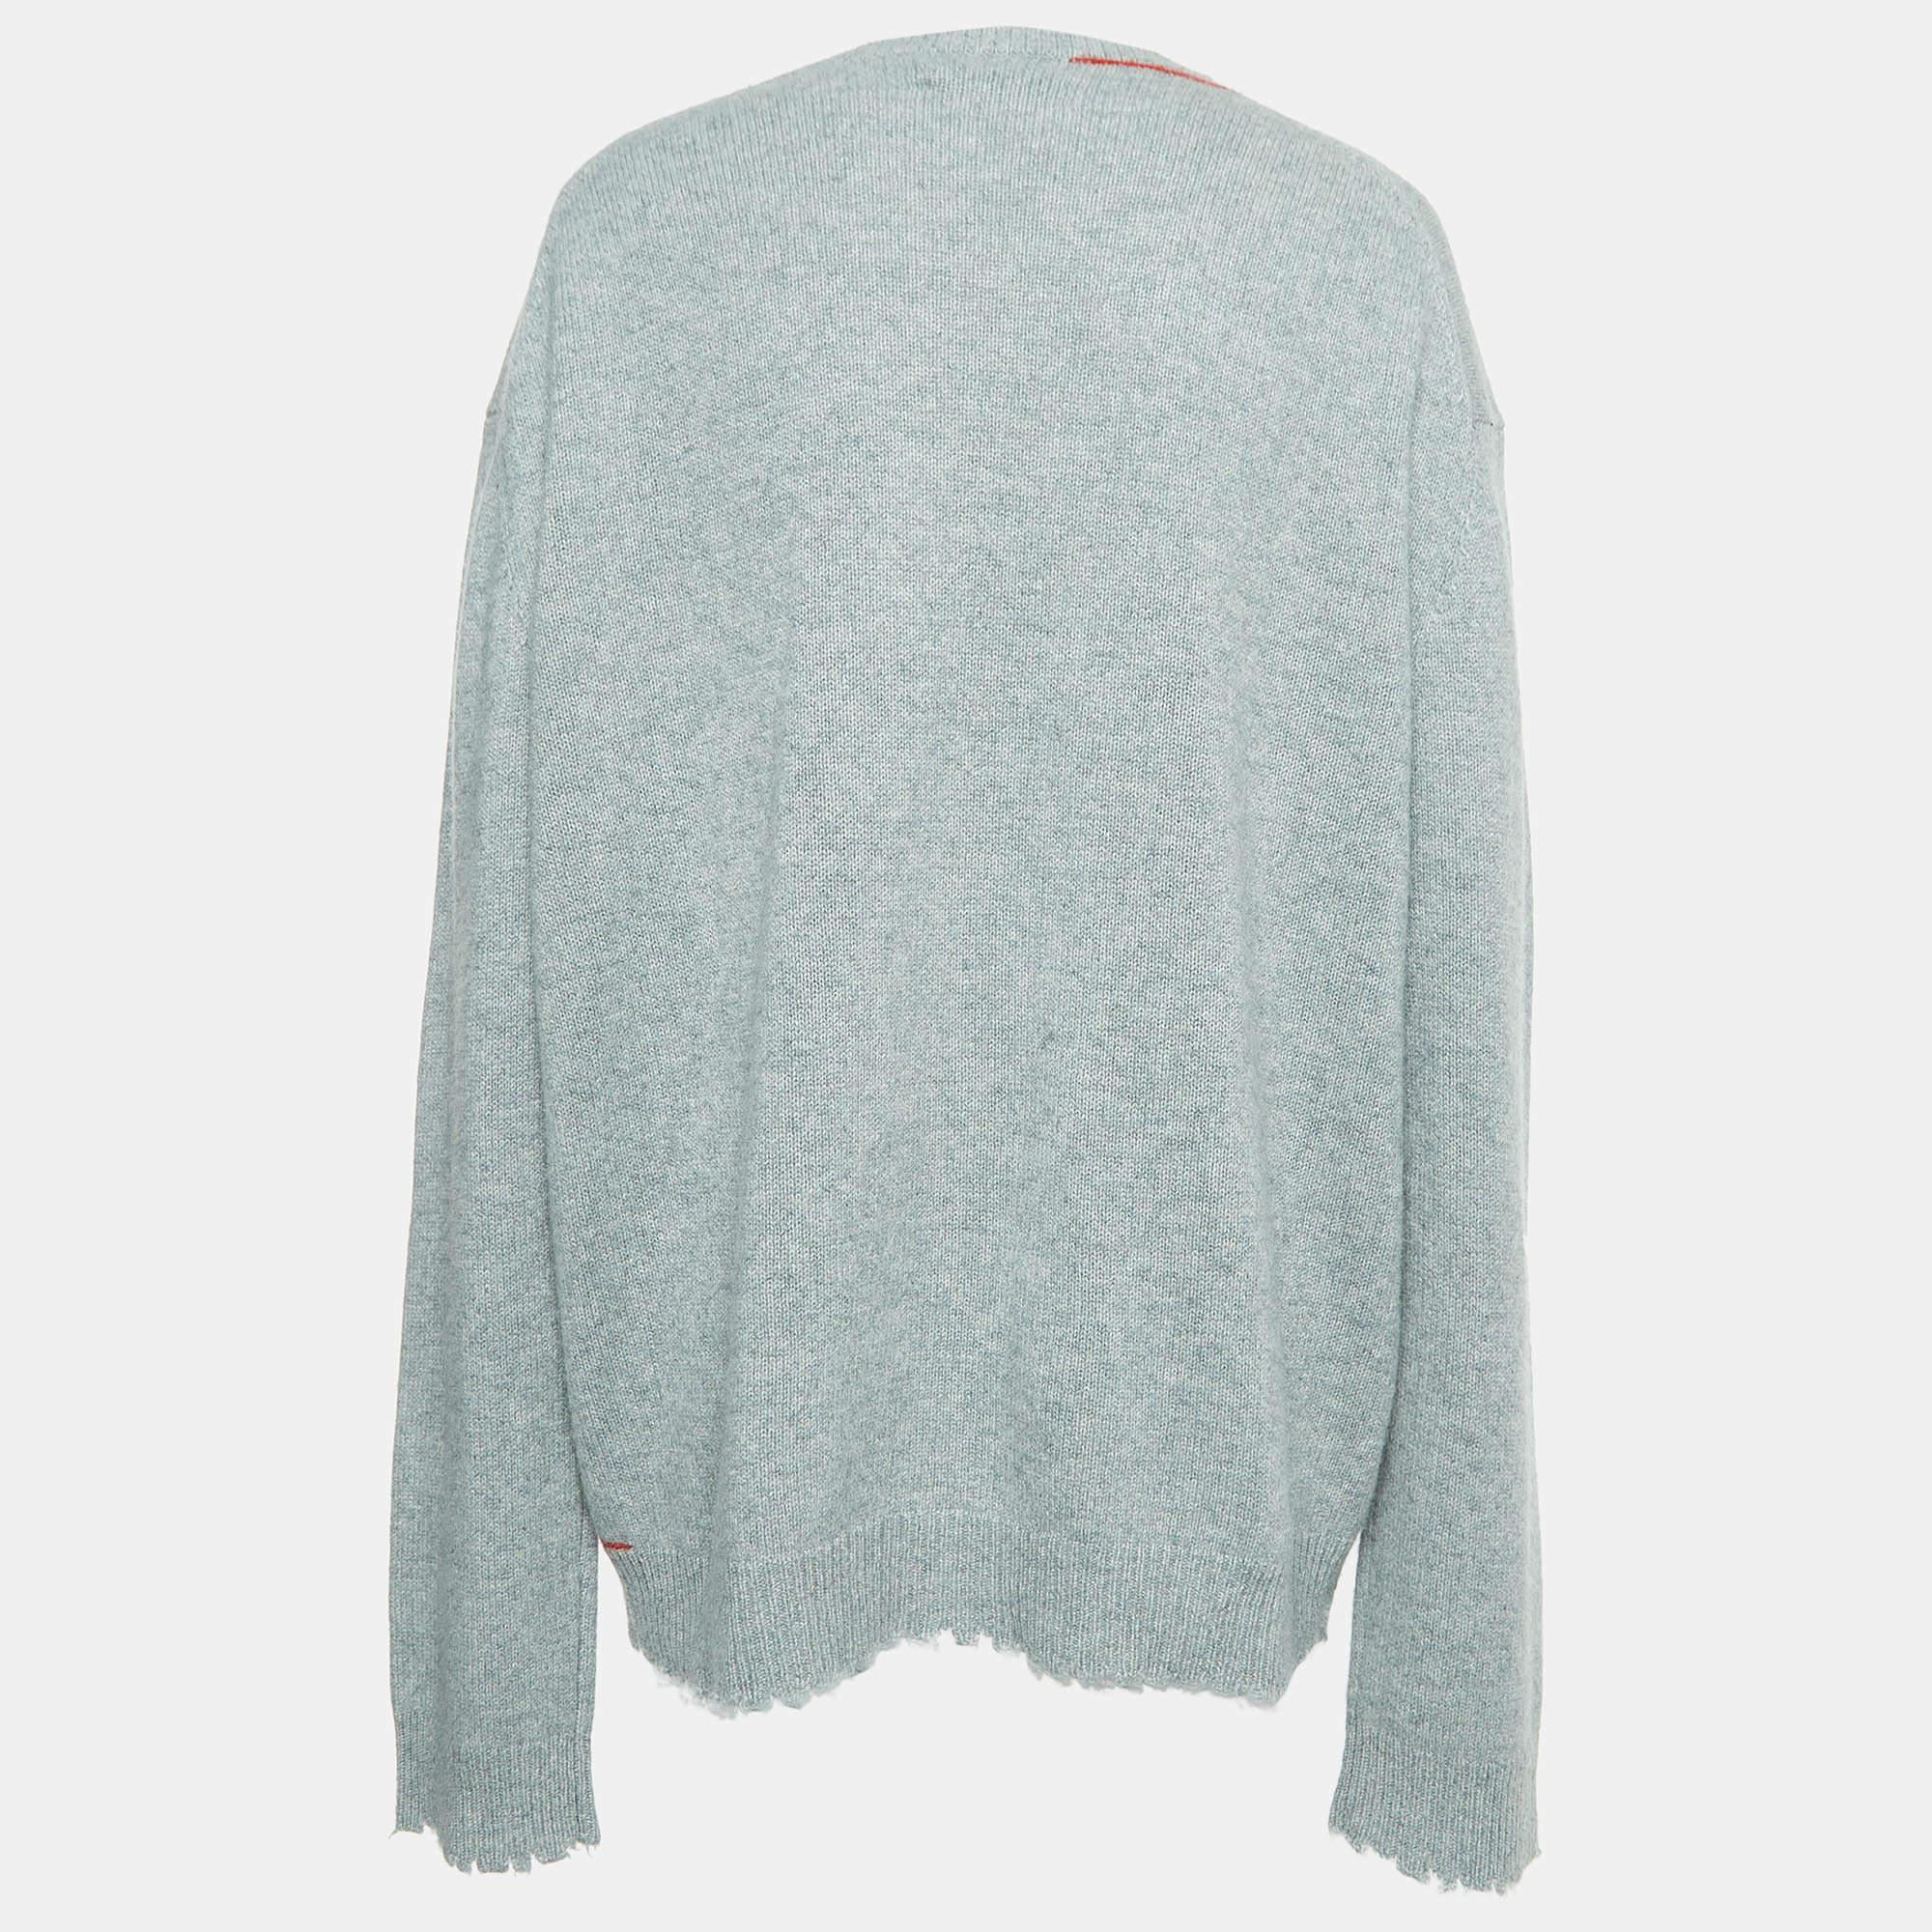 Zadig & Voltaire Grey Cashmere Distressed Sweater XL 1